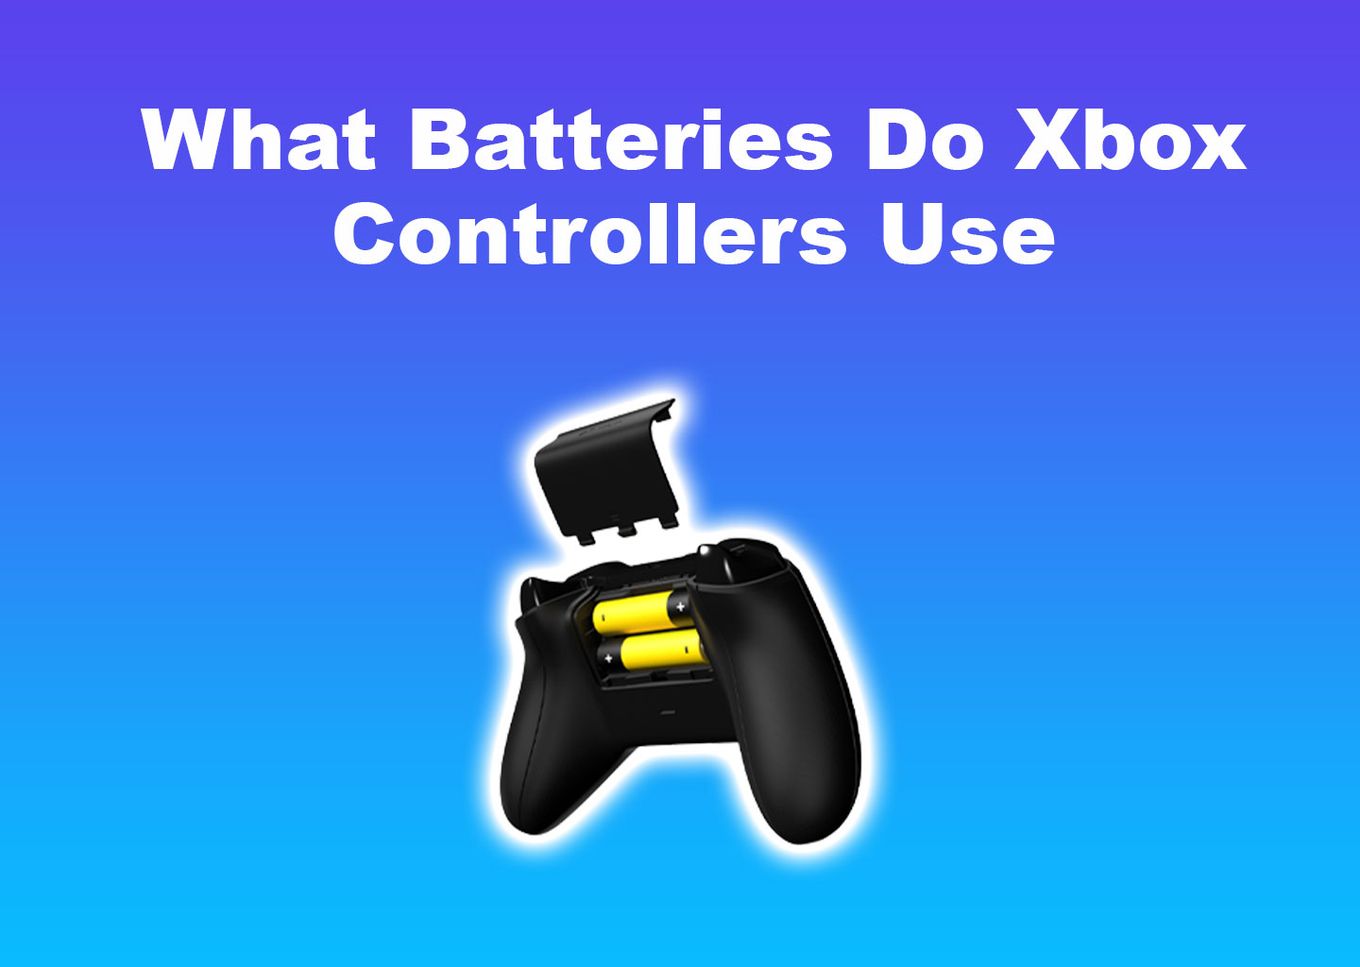 What Batteries Do Xbox Controllers Use